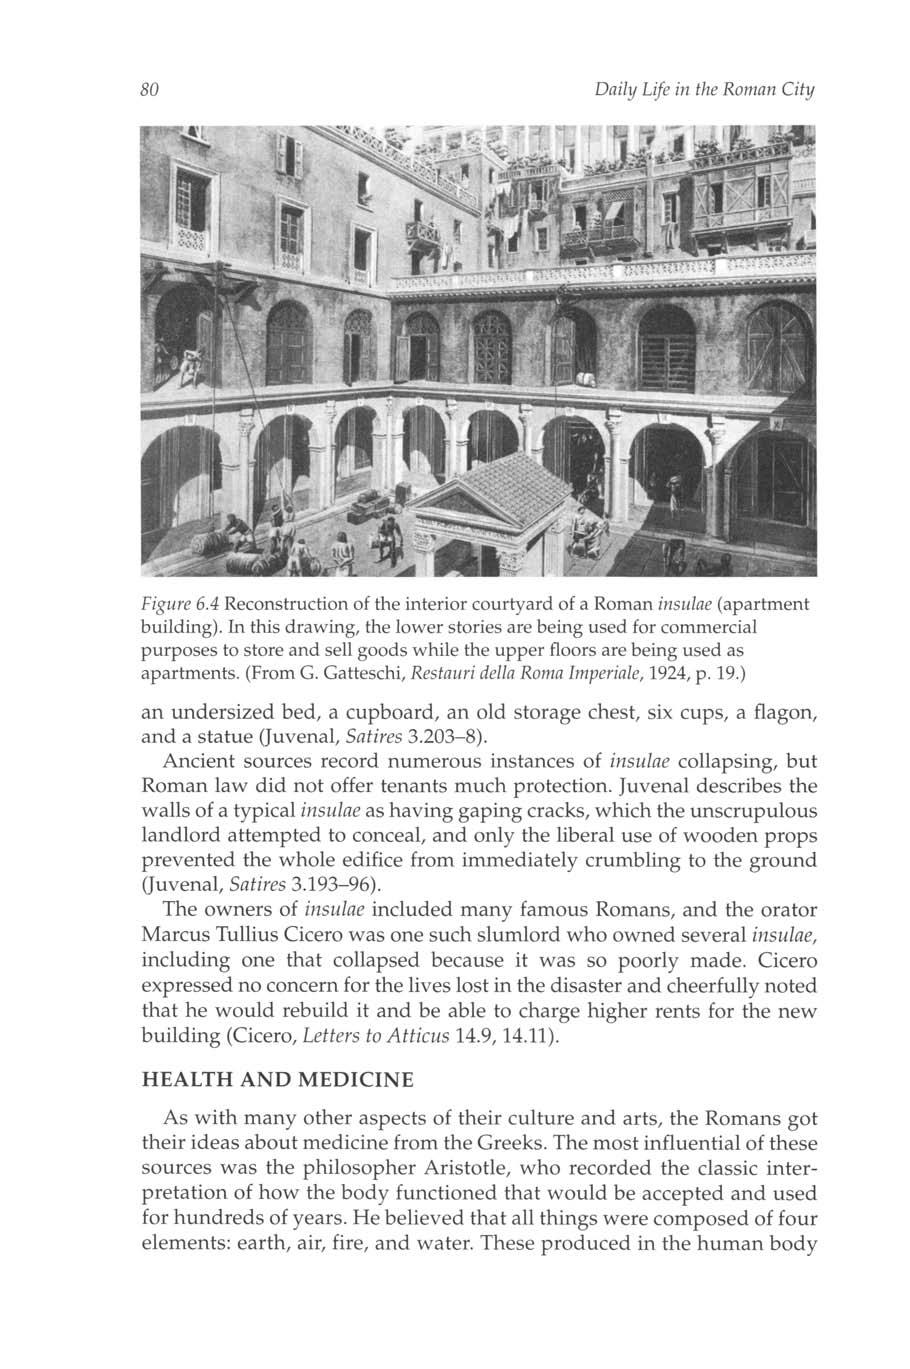 80 Daily Life in the Roman City Figure 6.4 Reconstruction of the interior courtyard of a Roman insulae (apartment building).